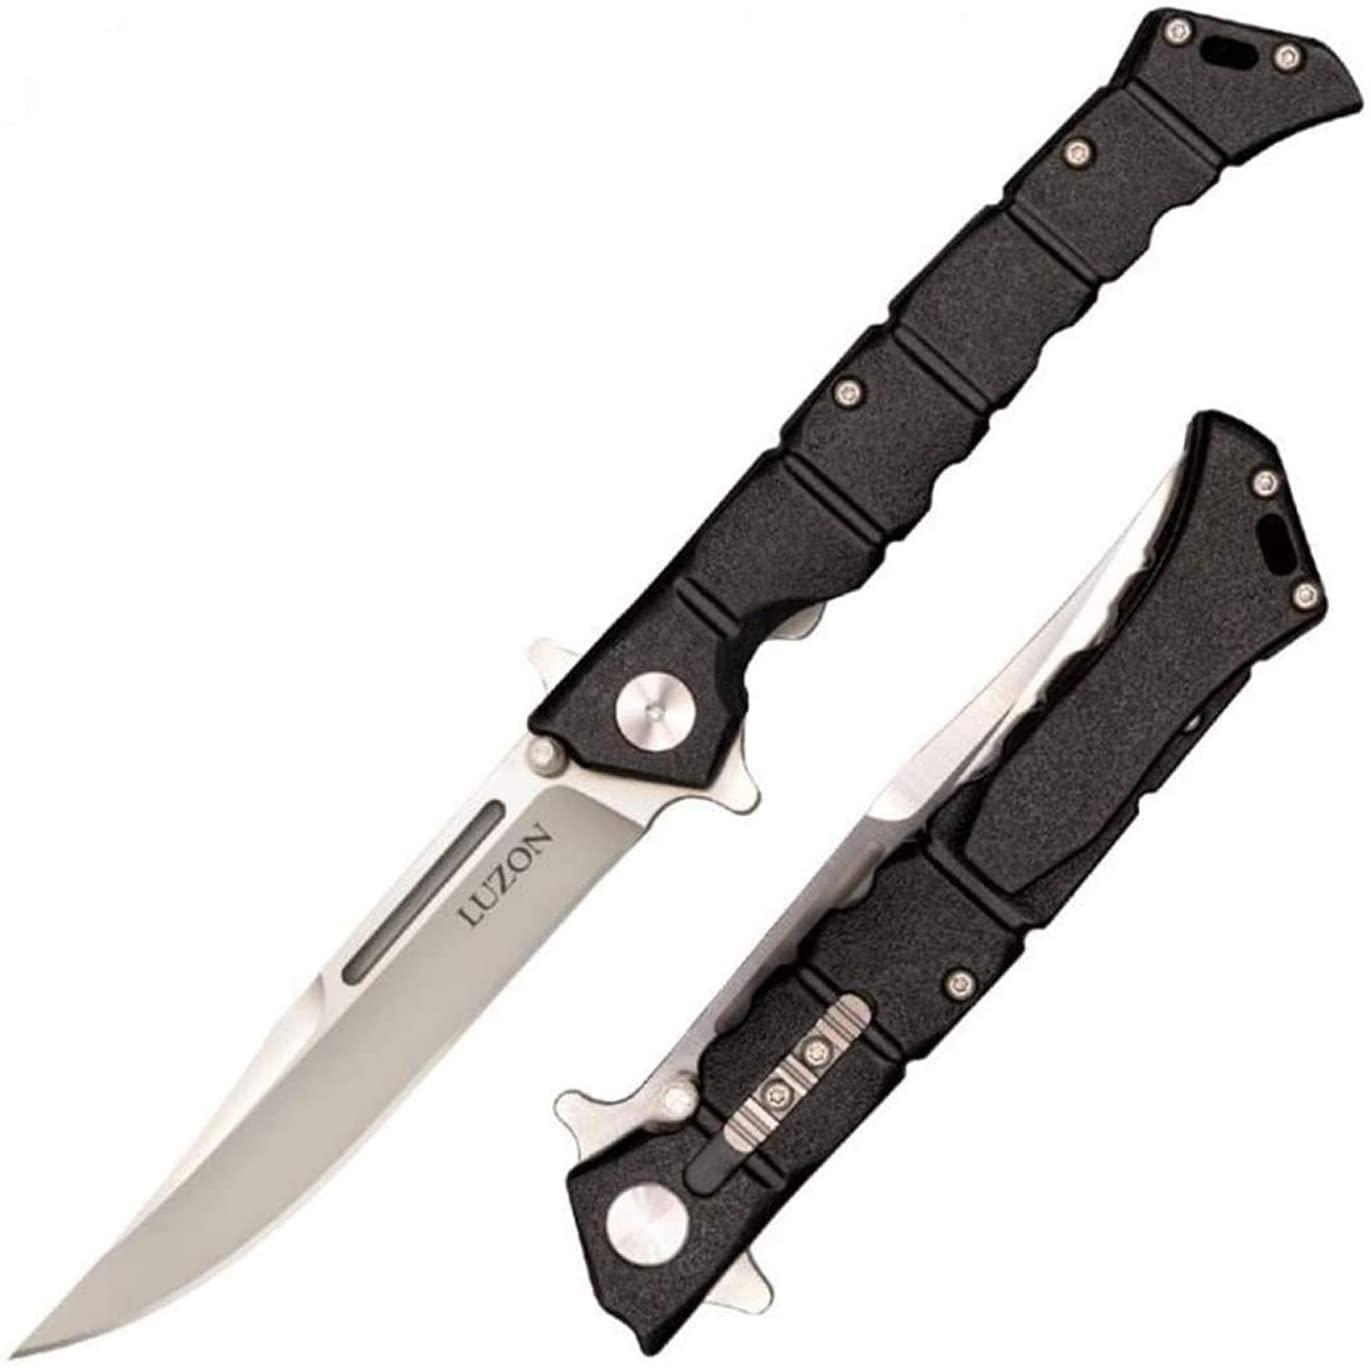 Cold Steel 20NQX Luzon, Large, Black/Silver - $33.14 (Free S/H over $25)